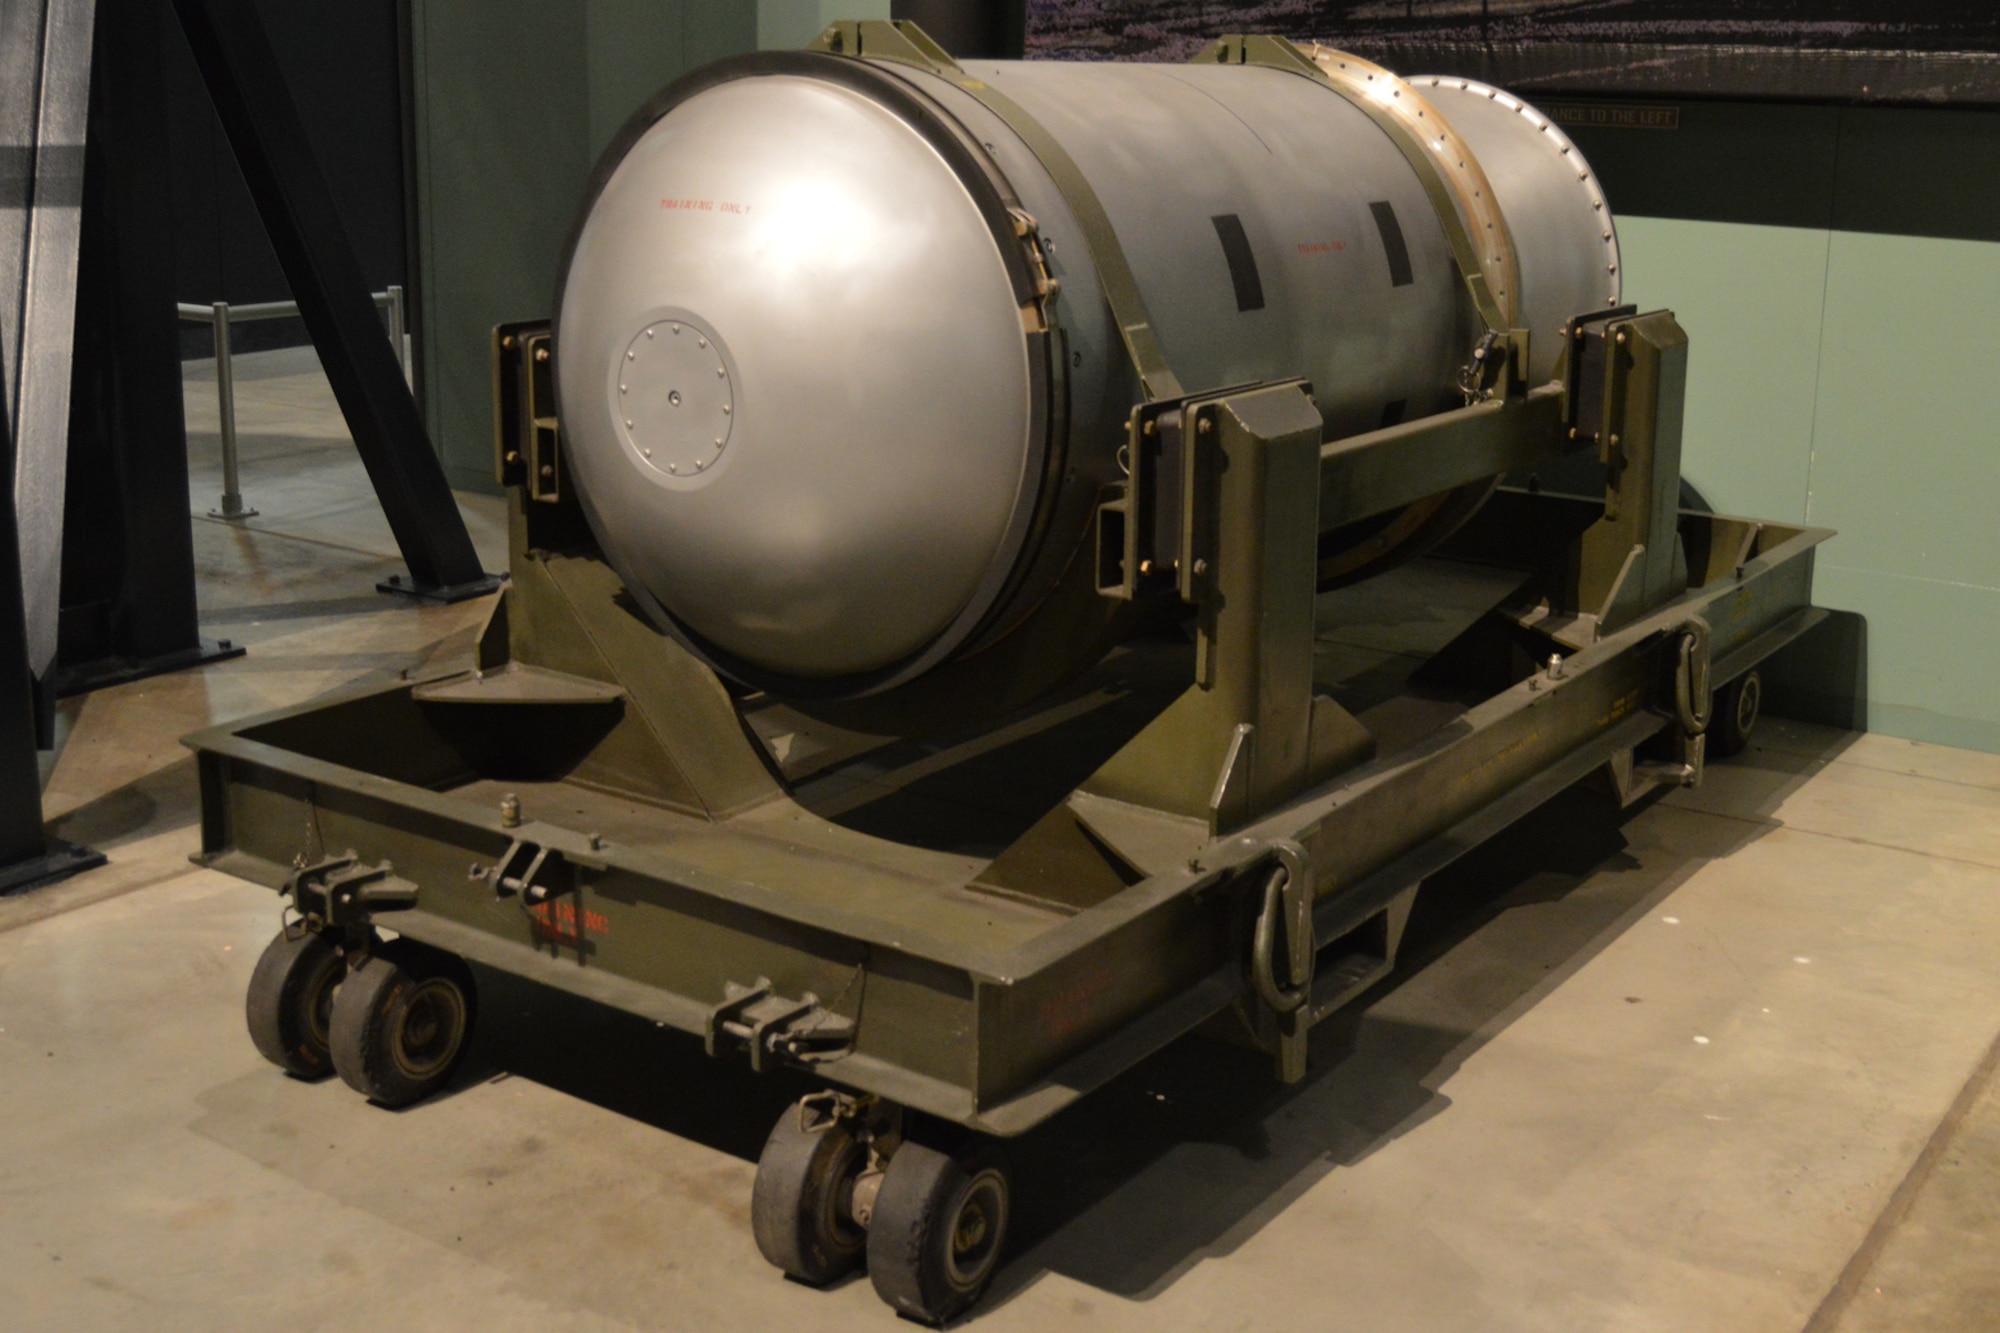 DAYTON, Ohio -- W53 Thermonuclear Bomb on display in the Missile and Space Gallery at the National Museum of the U.S. Air Force. (U.S. Air Force photo)
